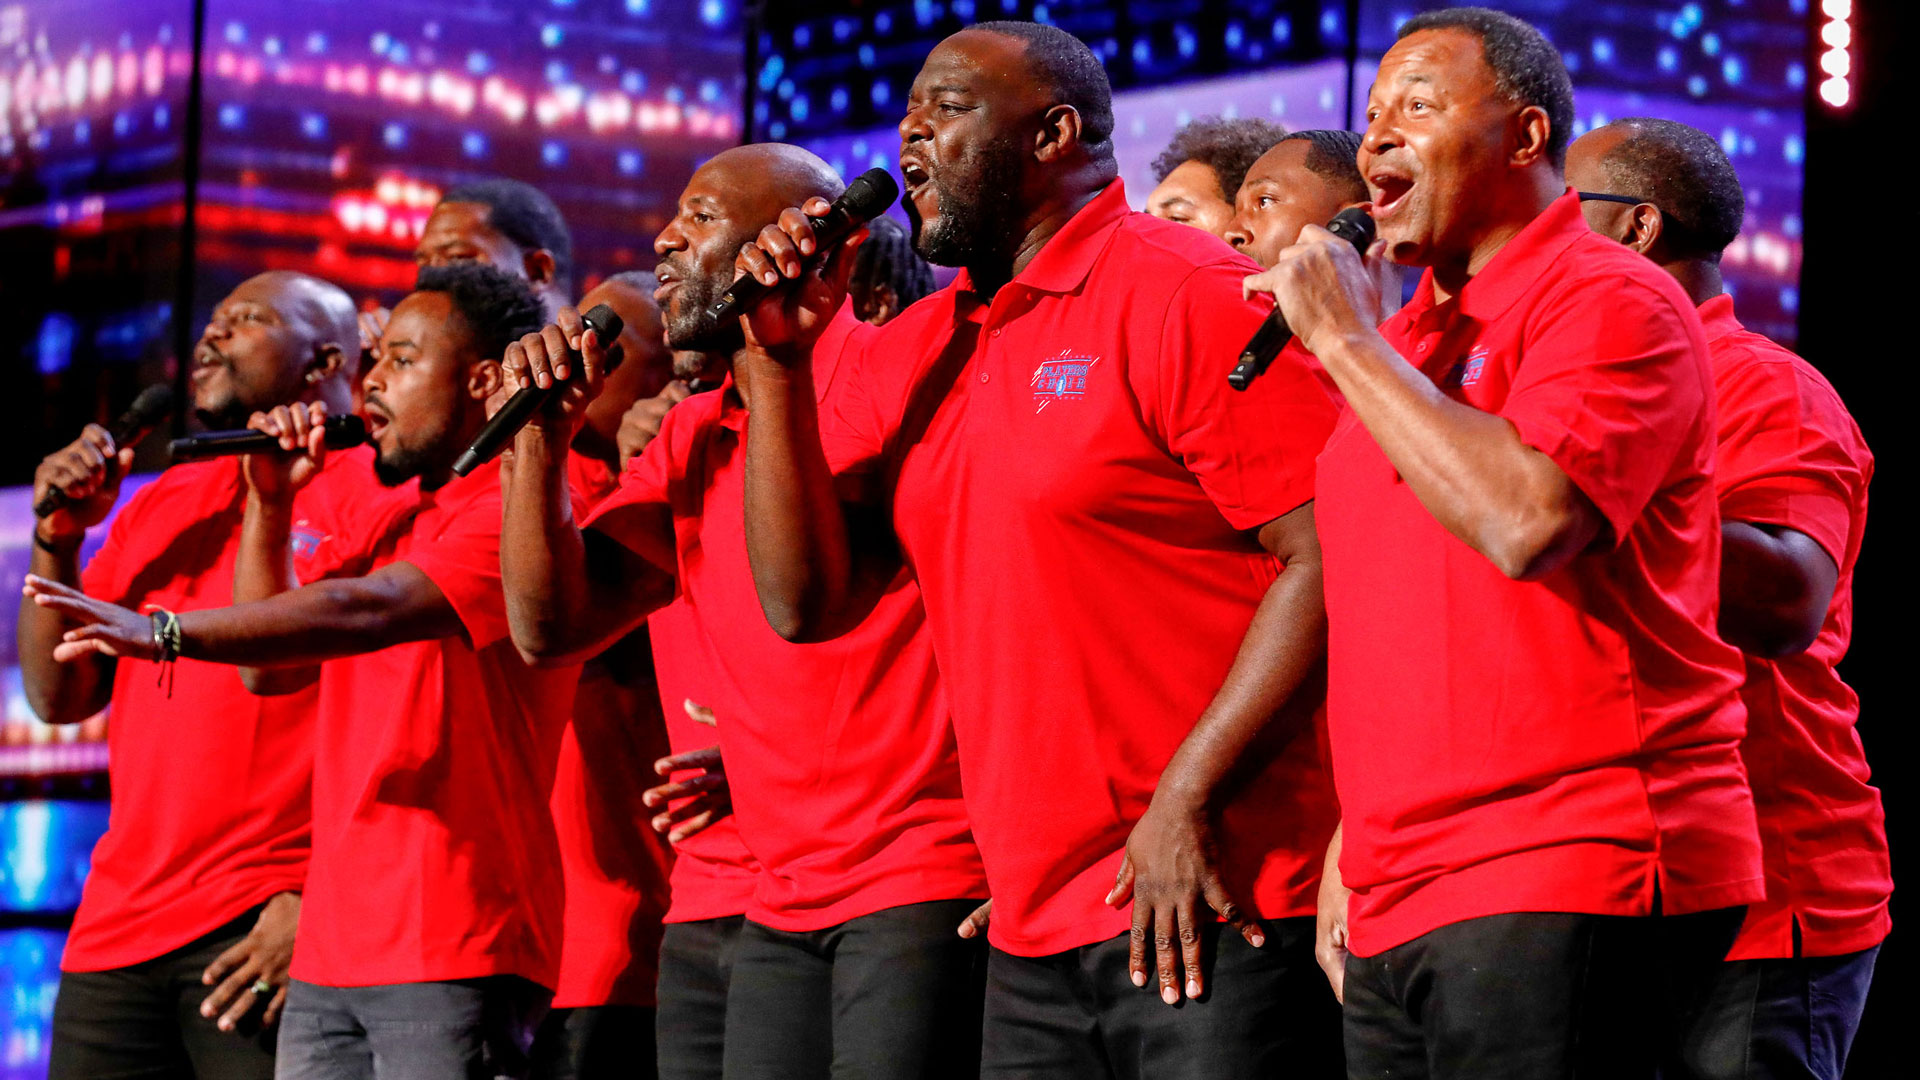 Watch America's Got Talent Highlight NFL Players Team Up to Audition